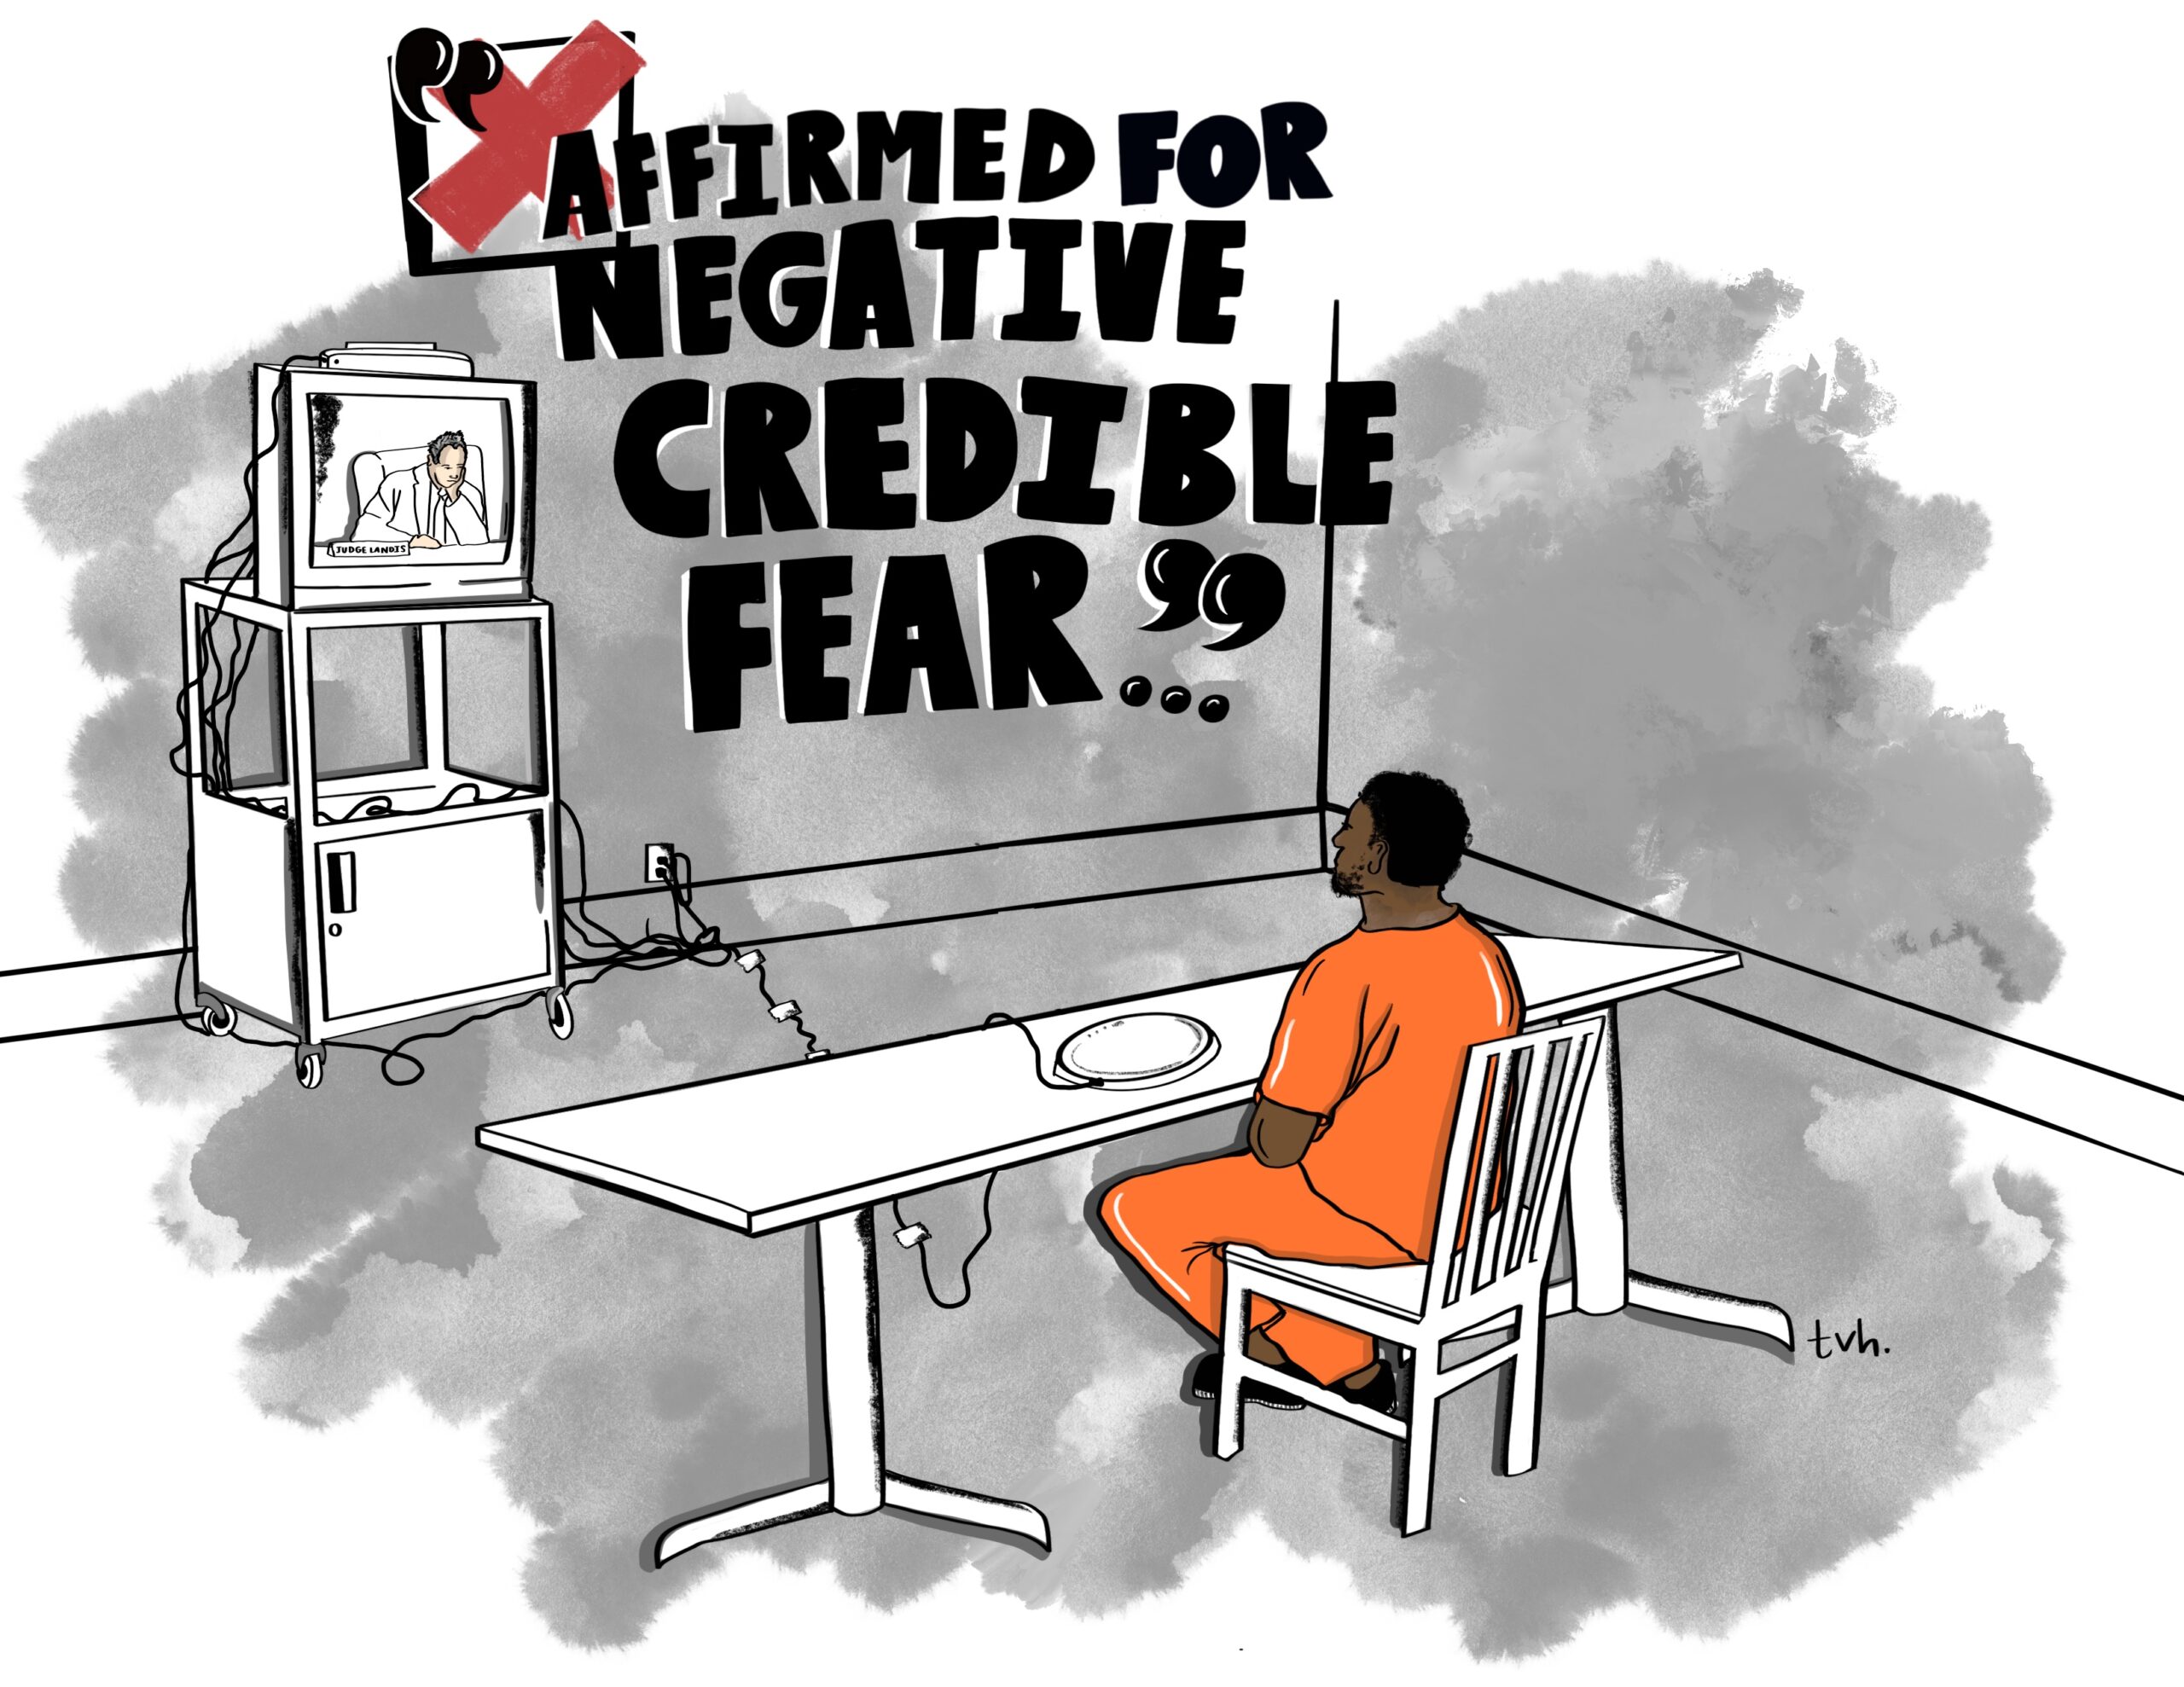 A drawing of a Black man in an orange jumpsuit sitting and facing a TV screen with a judge on it